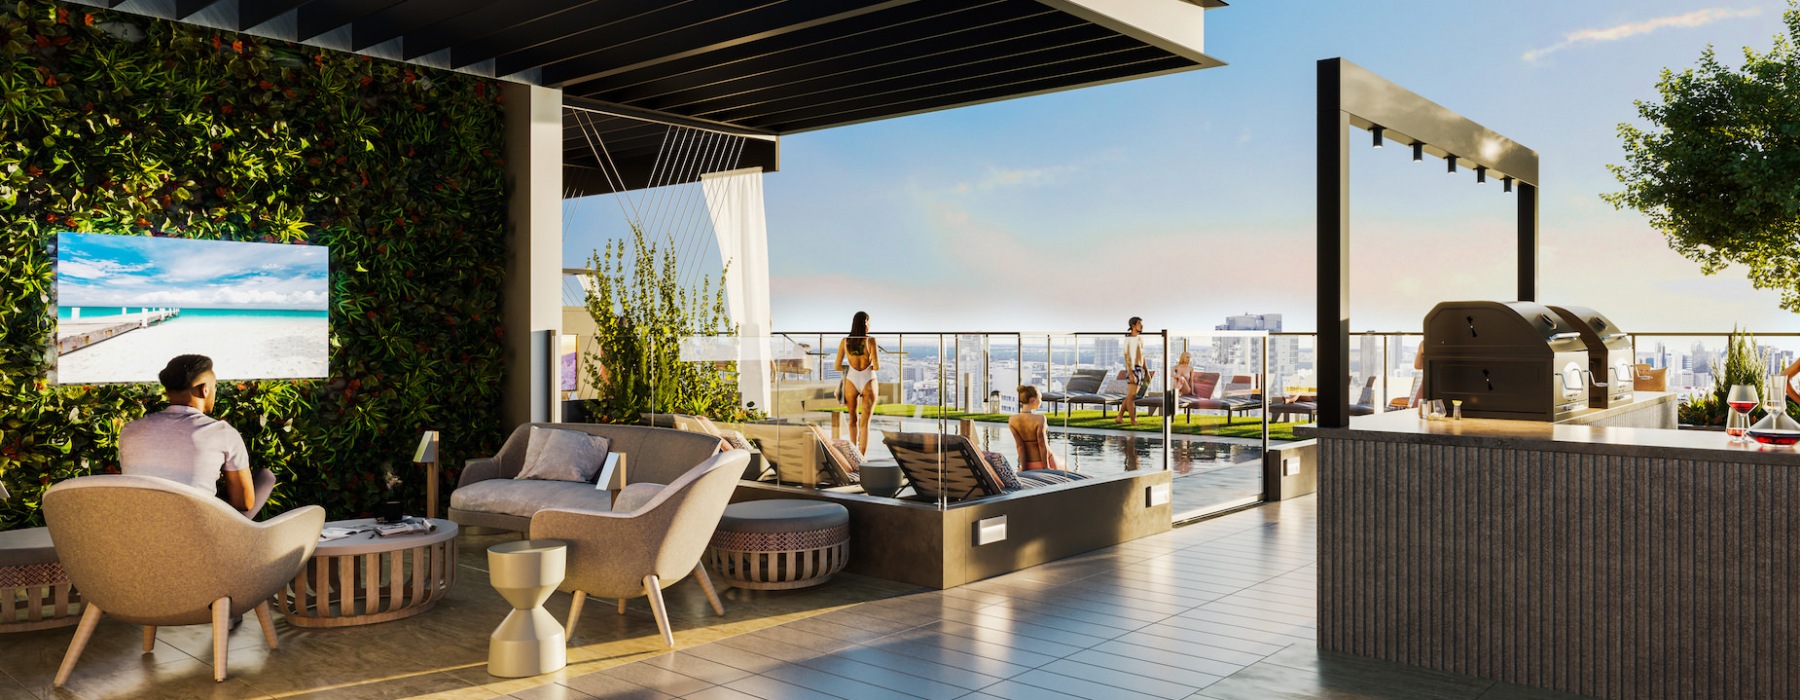 Rooftop pool deck and lounge with BBQs